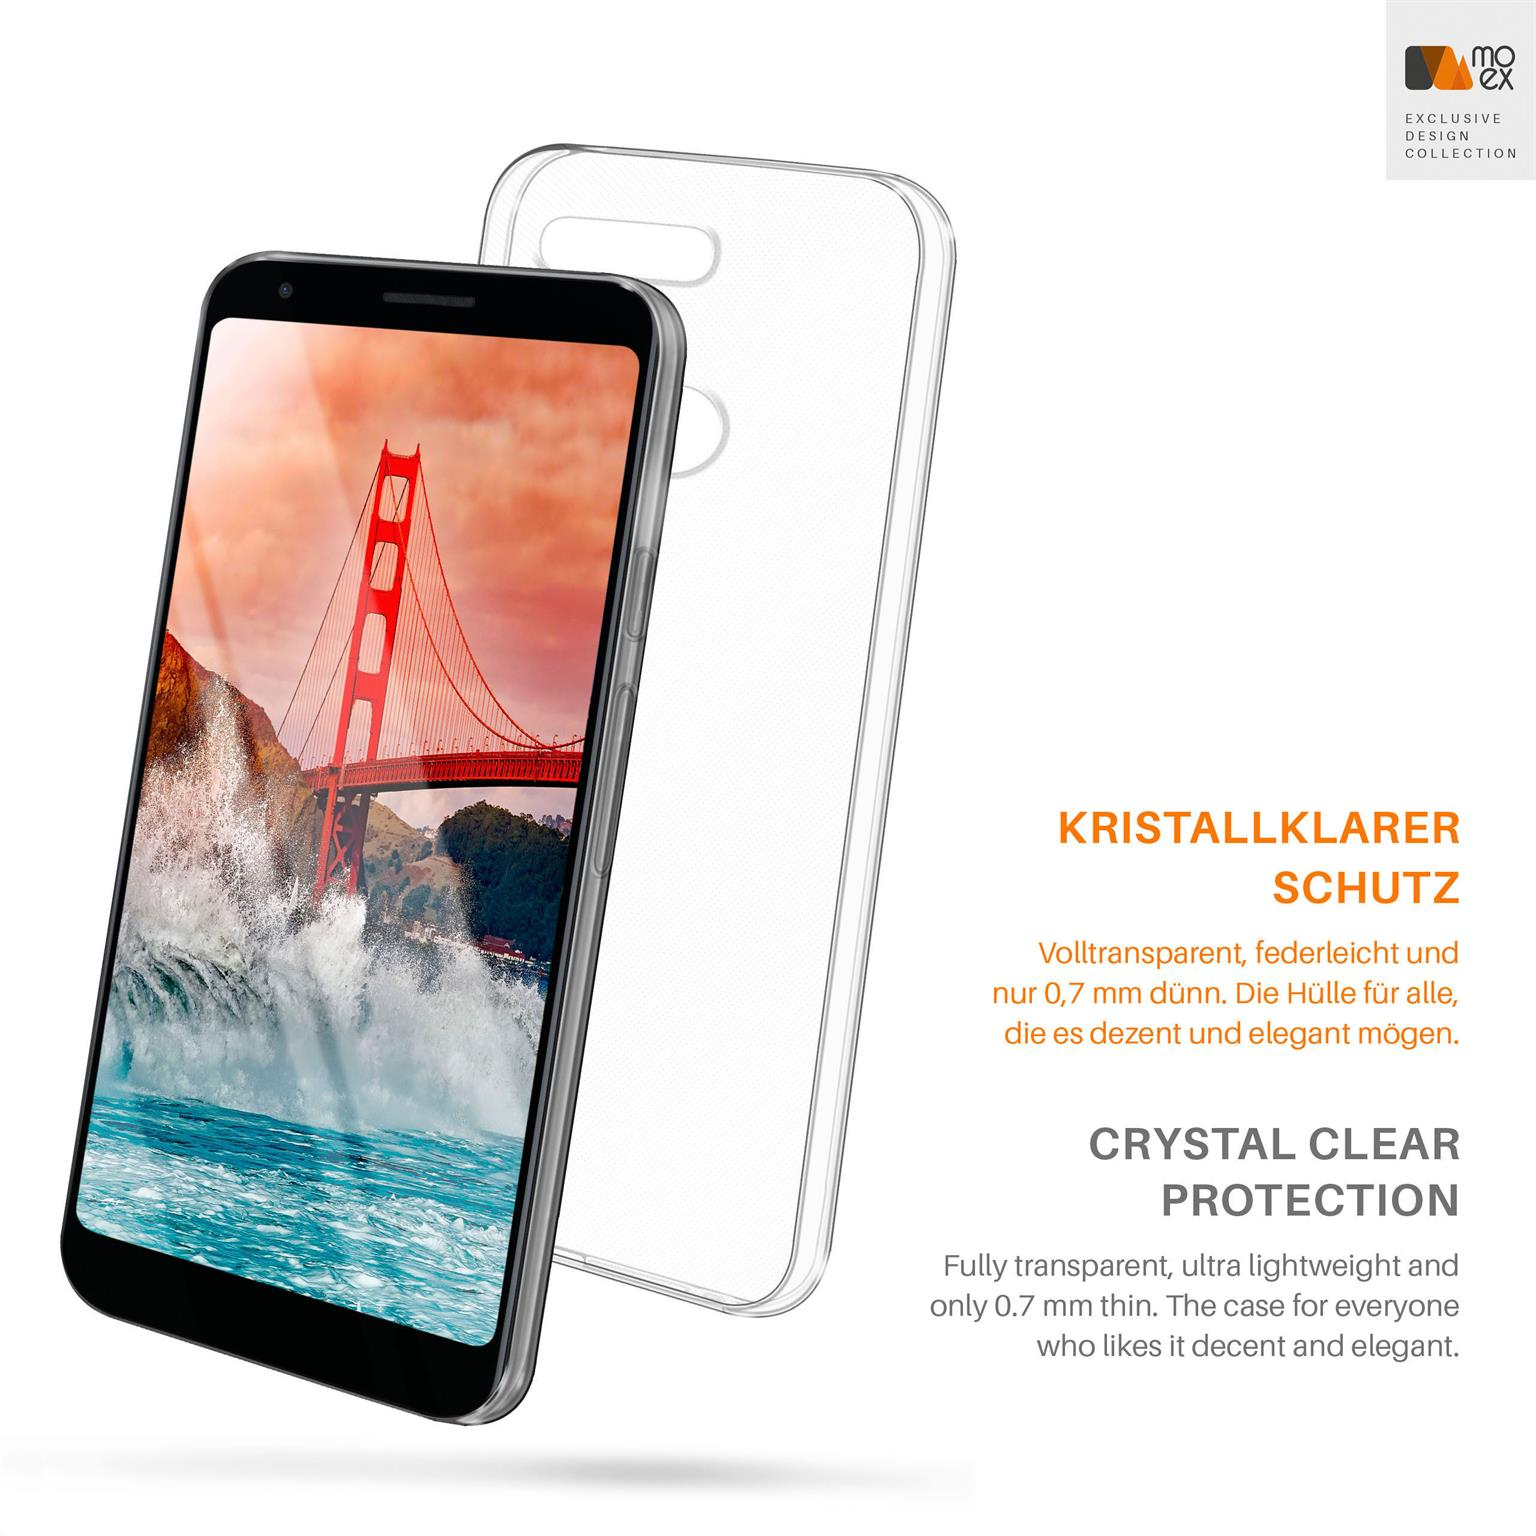 Case, Crystal-Clear 3a, Pixel Backcover, Aero MOEX Google,